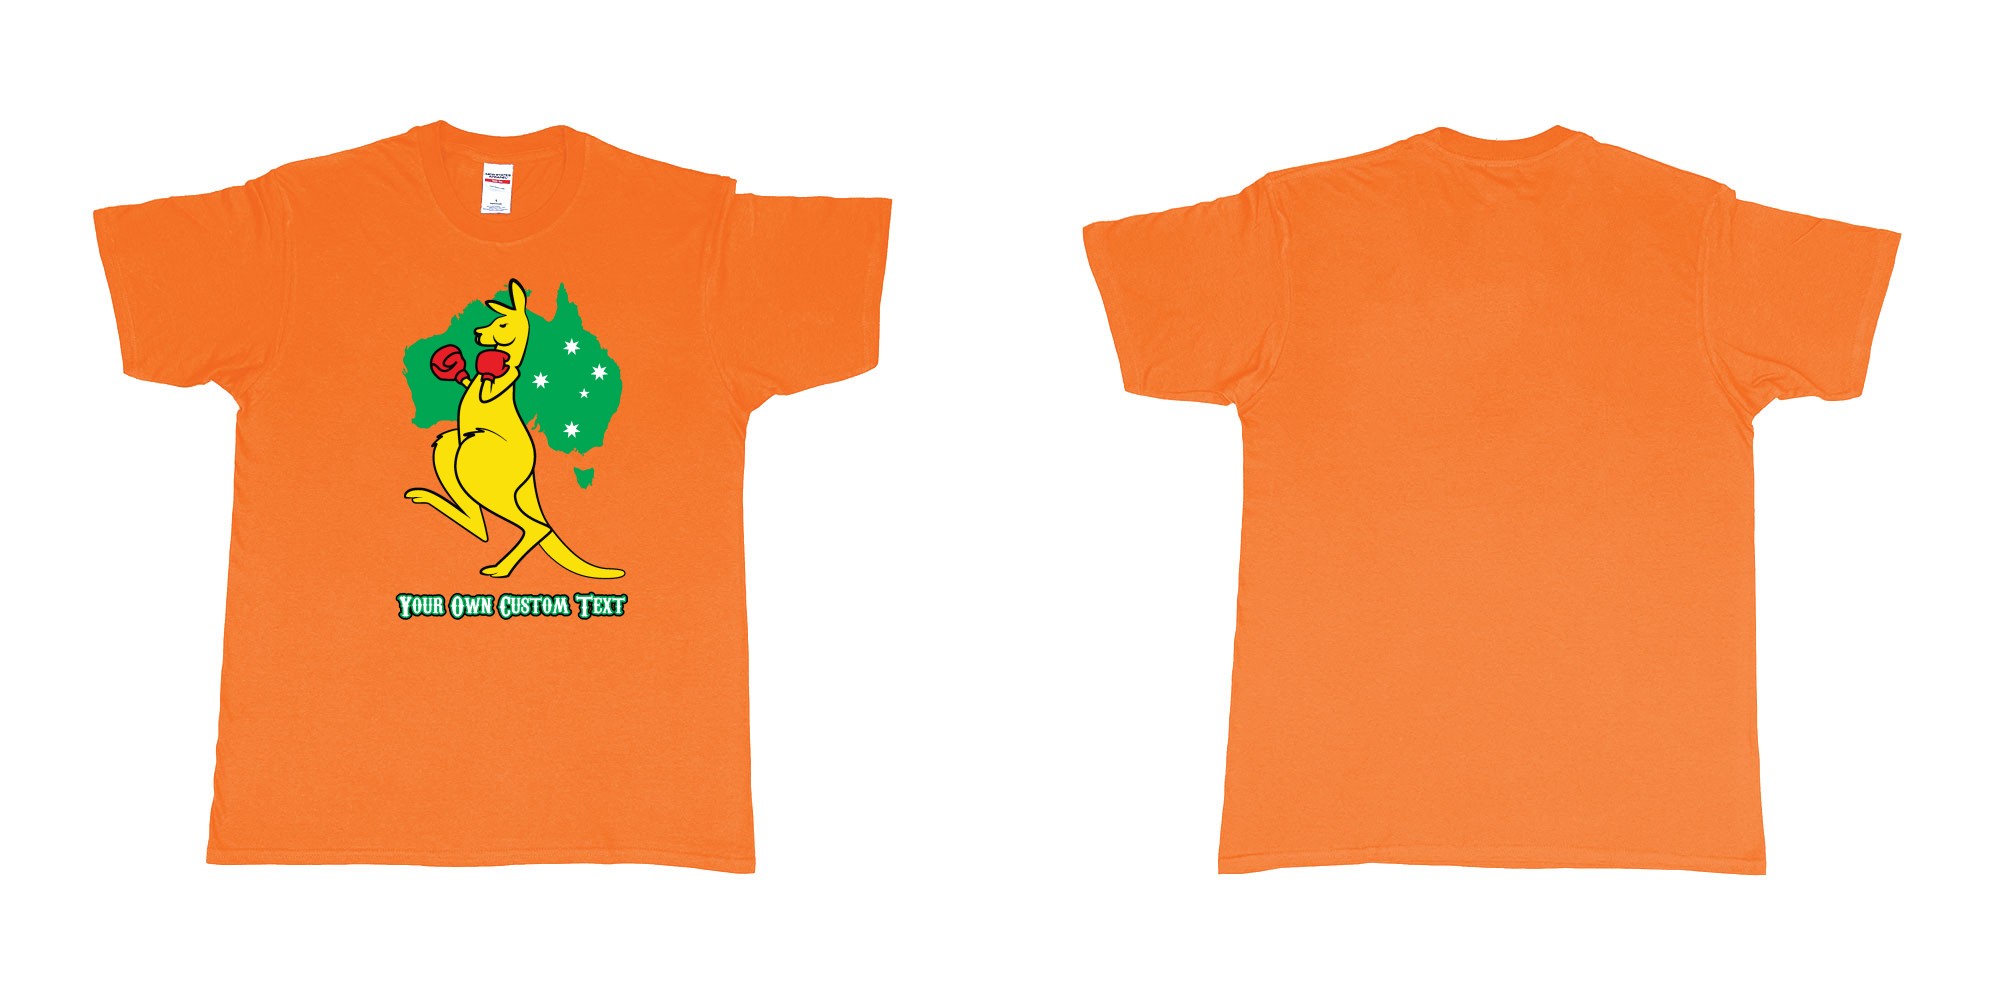 Custom tshirt design boxing kangaroo in fabric color orange choice your own text made in Bali by The Pirate Way